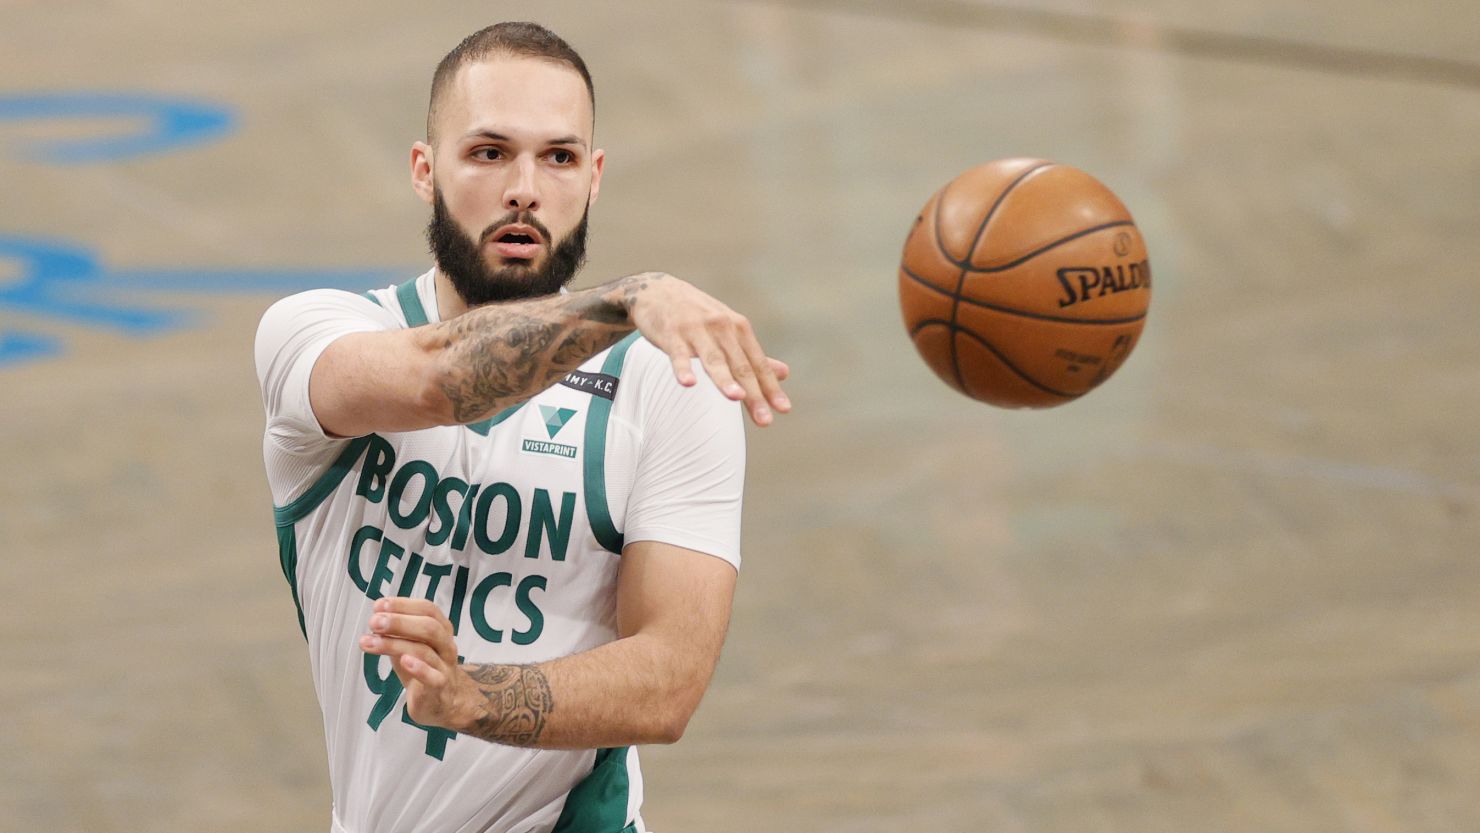 Evan Fournier has spoken about the lingering impact Covid-19 has had on his health.